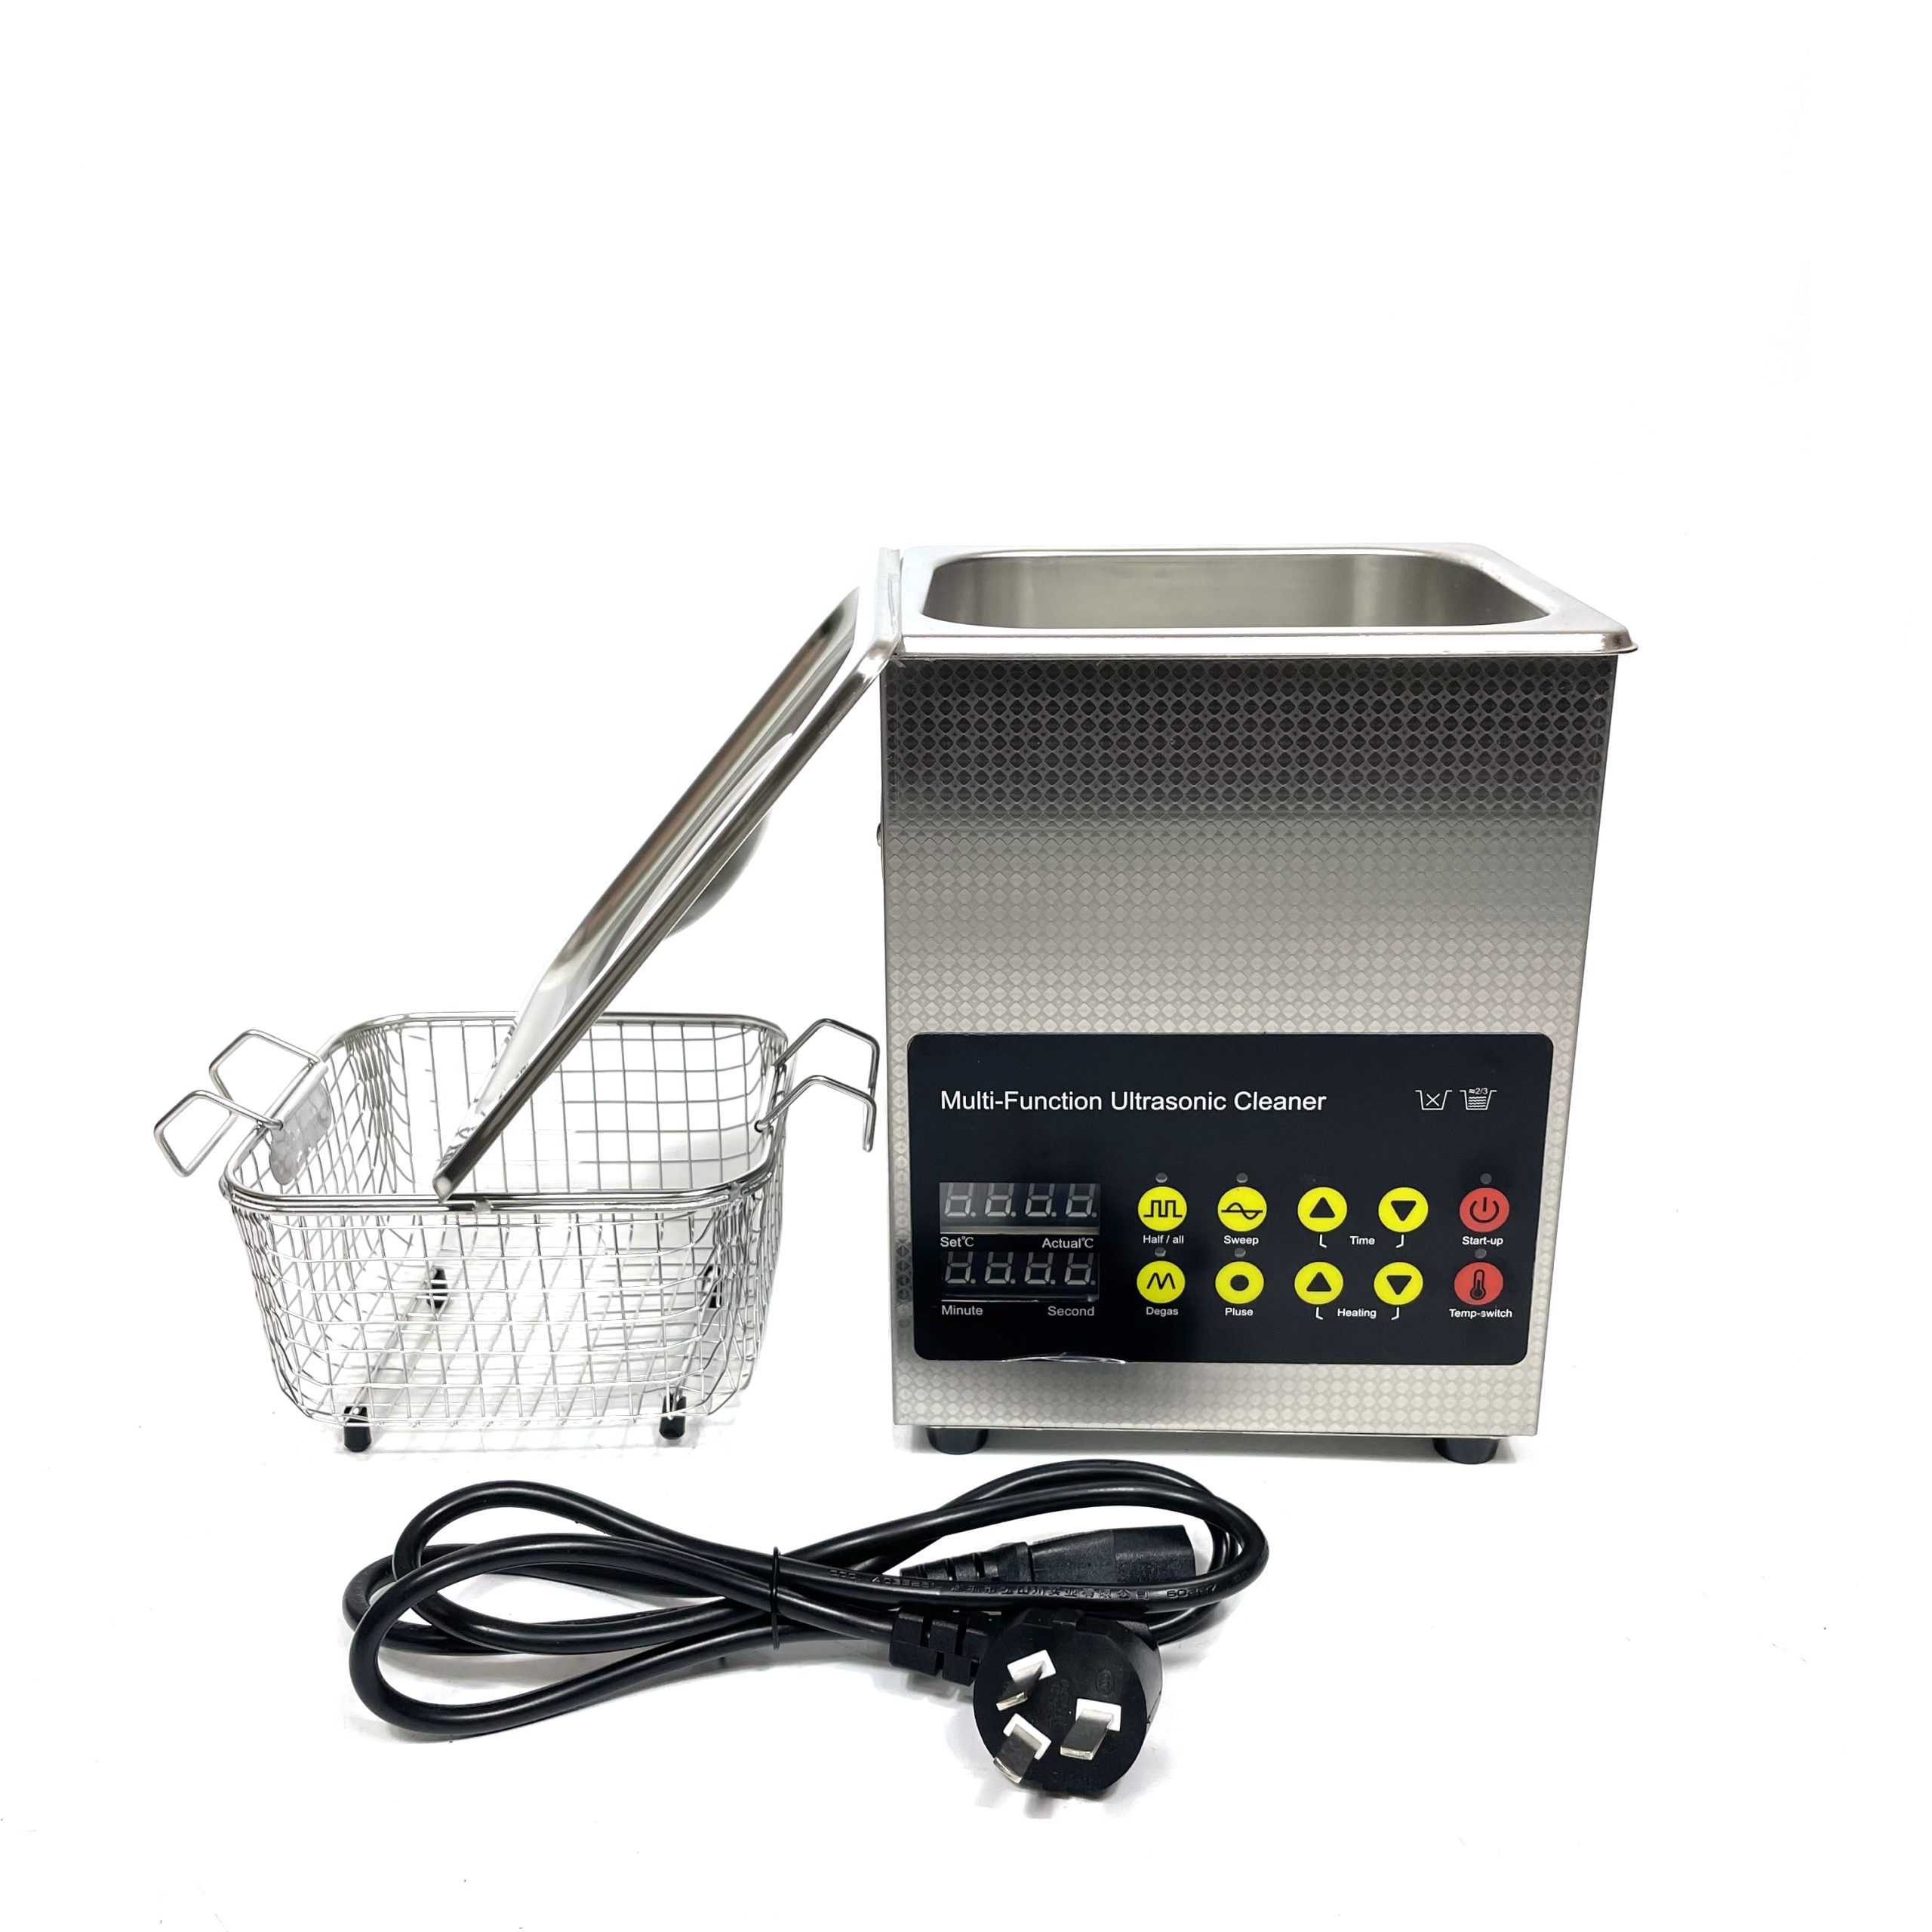 2023040813163232 scaled - 2.2l Degas Pulse Ultrasonic Cleaner With Heated Lcd Sweep Degas Display For Glass Jewelry Watch Or Pcb